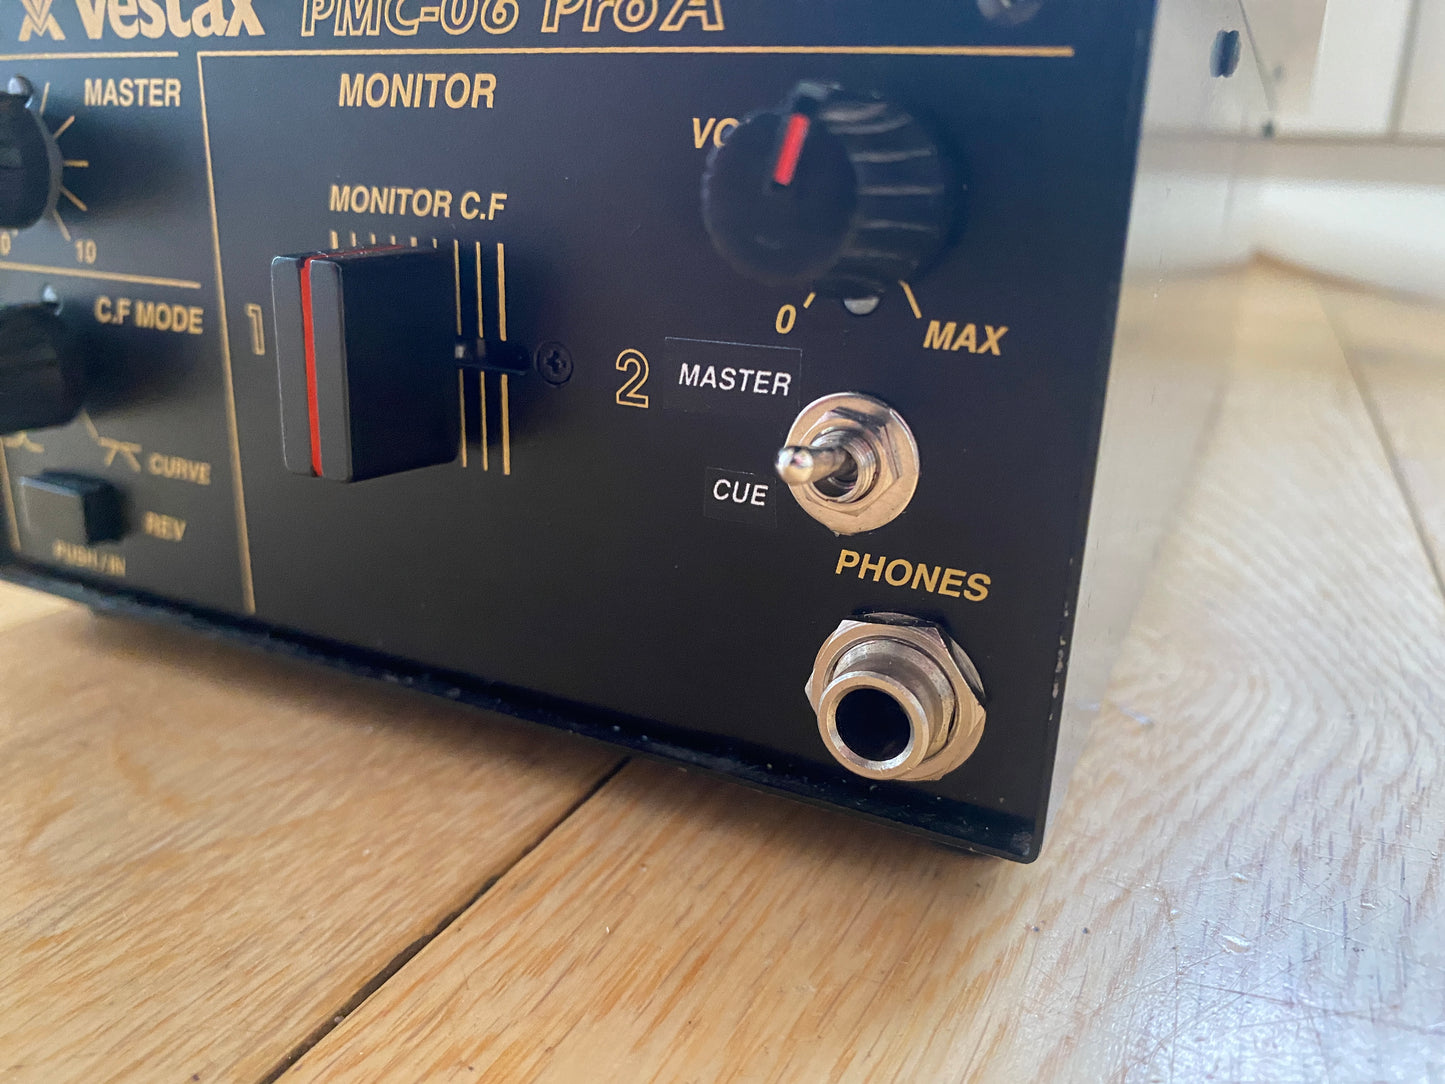 Vestax PMC-06 Pro A Serviced Mixer With ISP Faceplate